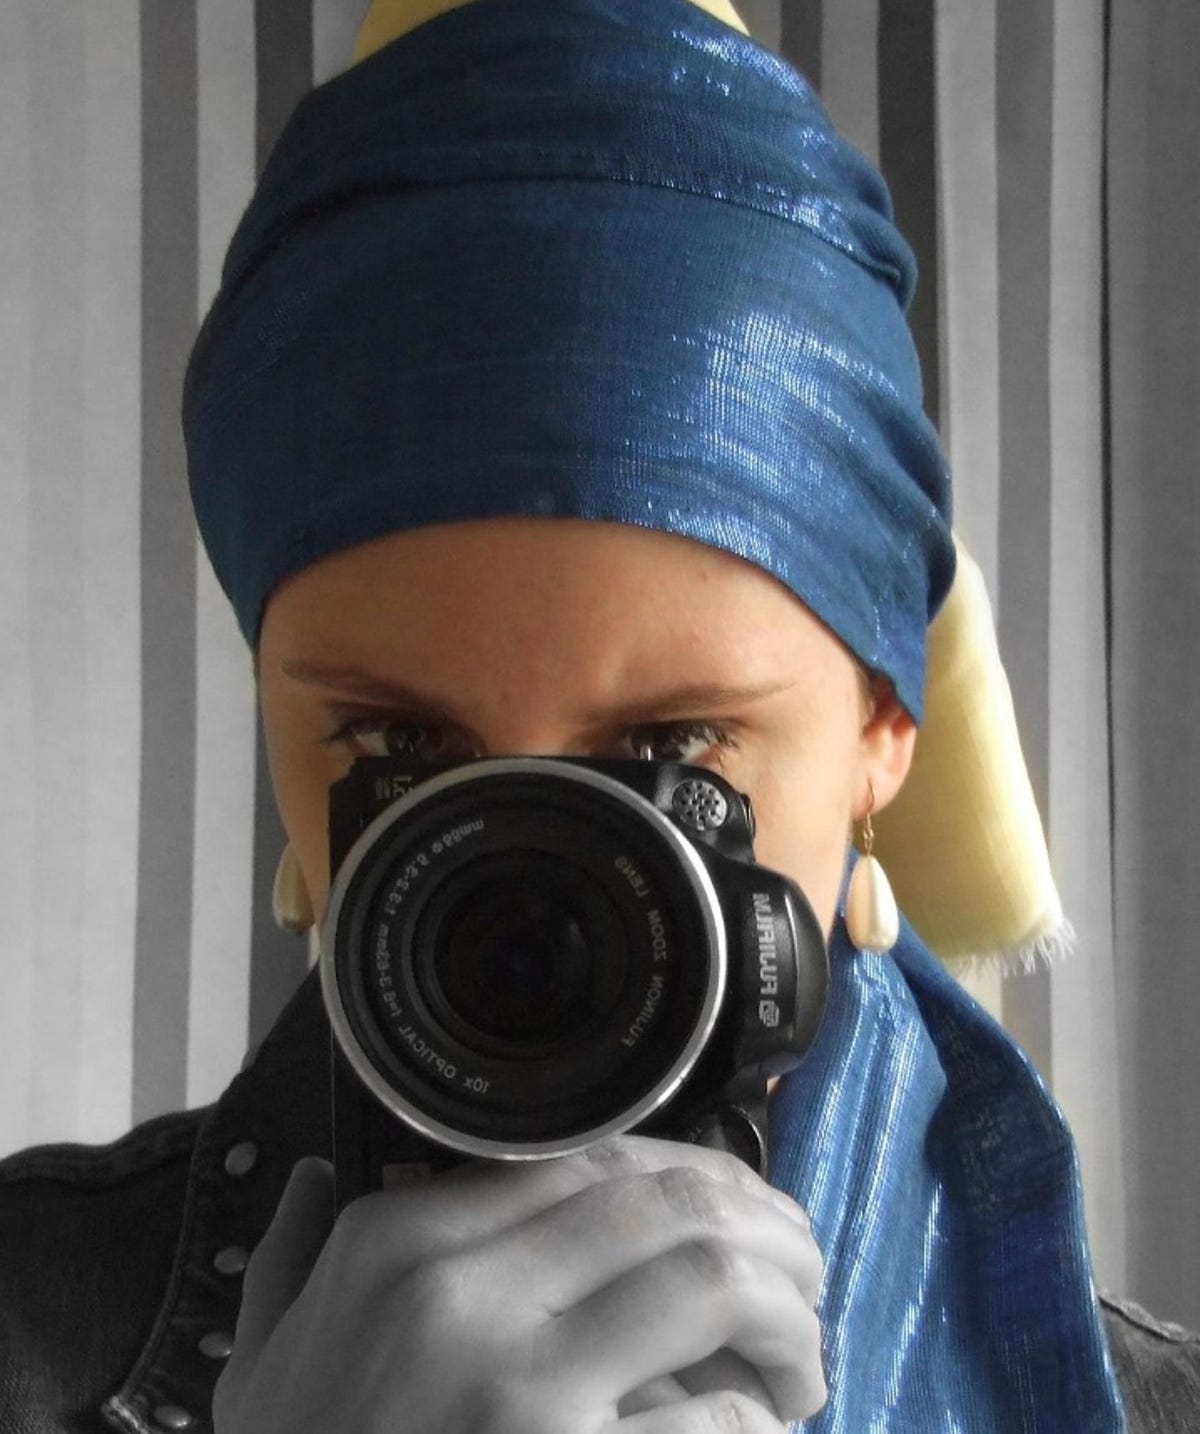 Woman wears a turban and two pearl earrings, while holding a camera